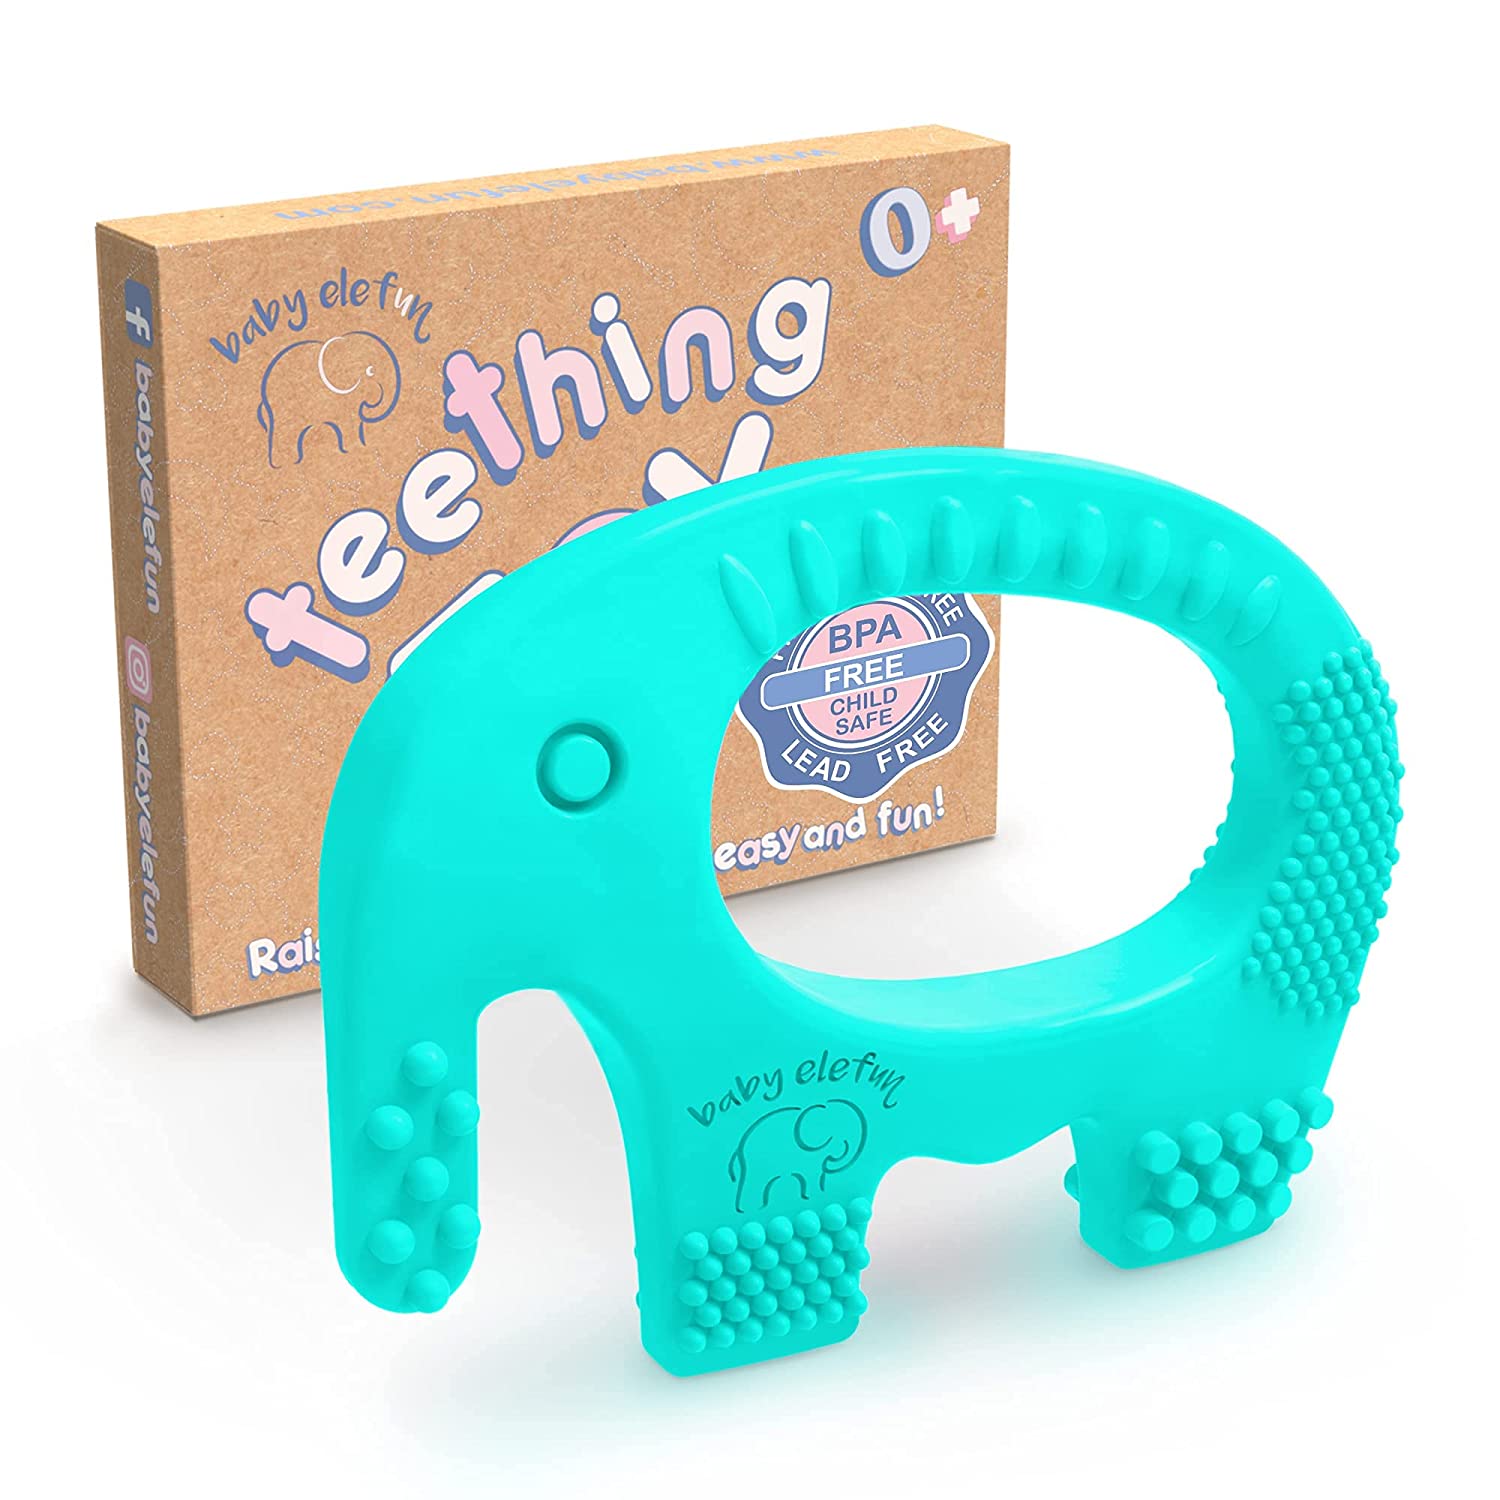 Baby Elefun Teething Toys, BPA Free Silicone Teethers - Easy to Hold - with Gift Christmas Stocking Stuffers Package, Highly Effective Elephant Teether Ring Toy for Babies 0-6 6-12 Months Boy or Girl